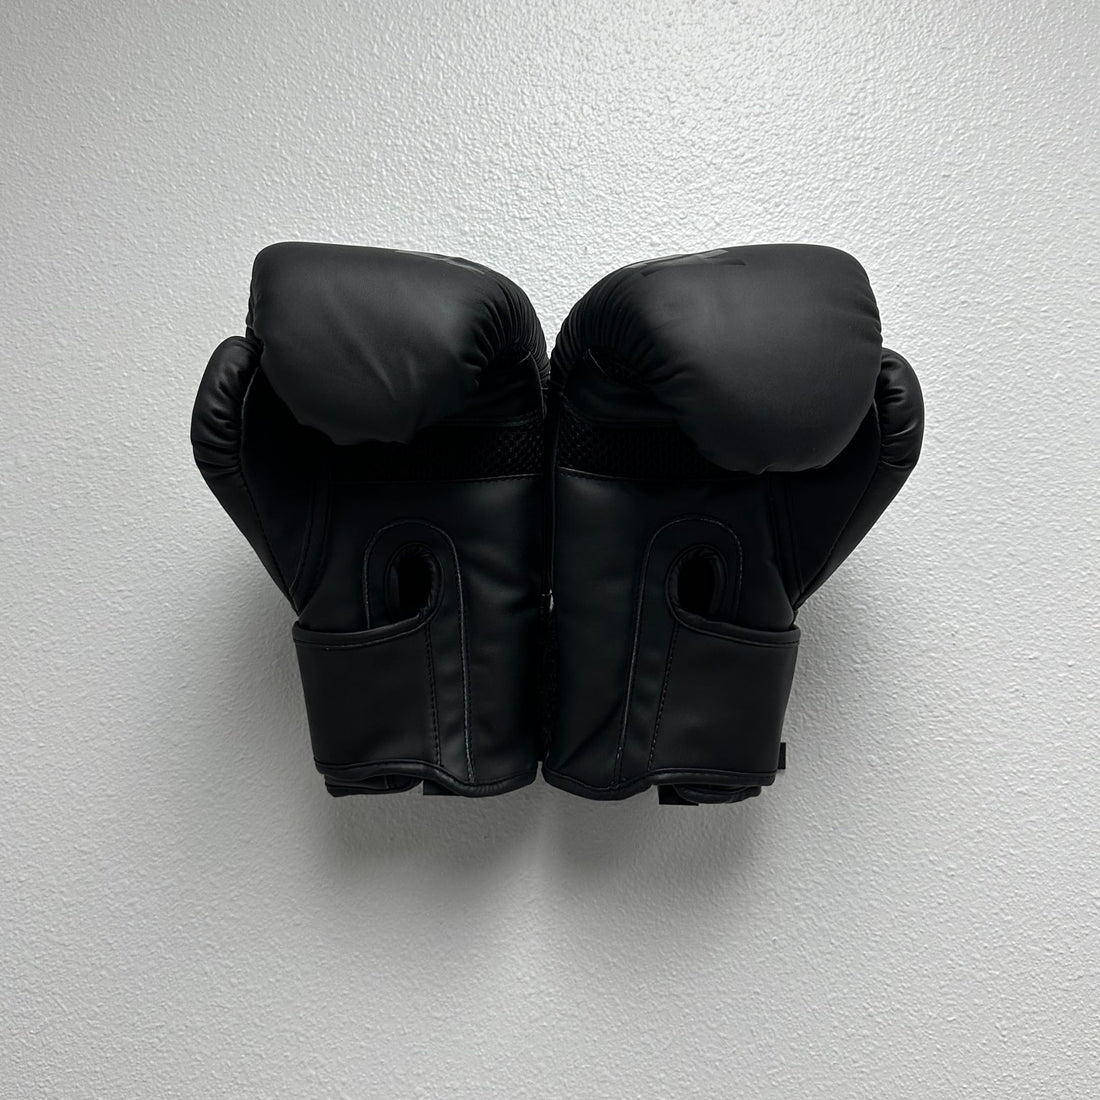 Chatelet Boxing Glove Wall Mount Dryer | Hang Up Boxing Gloves to Dry Out | Wall Display for Gloves | Made in USA